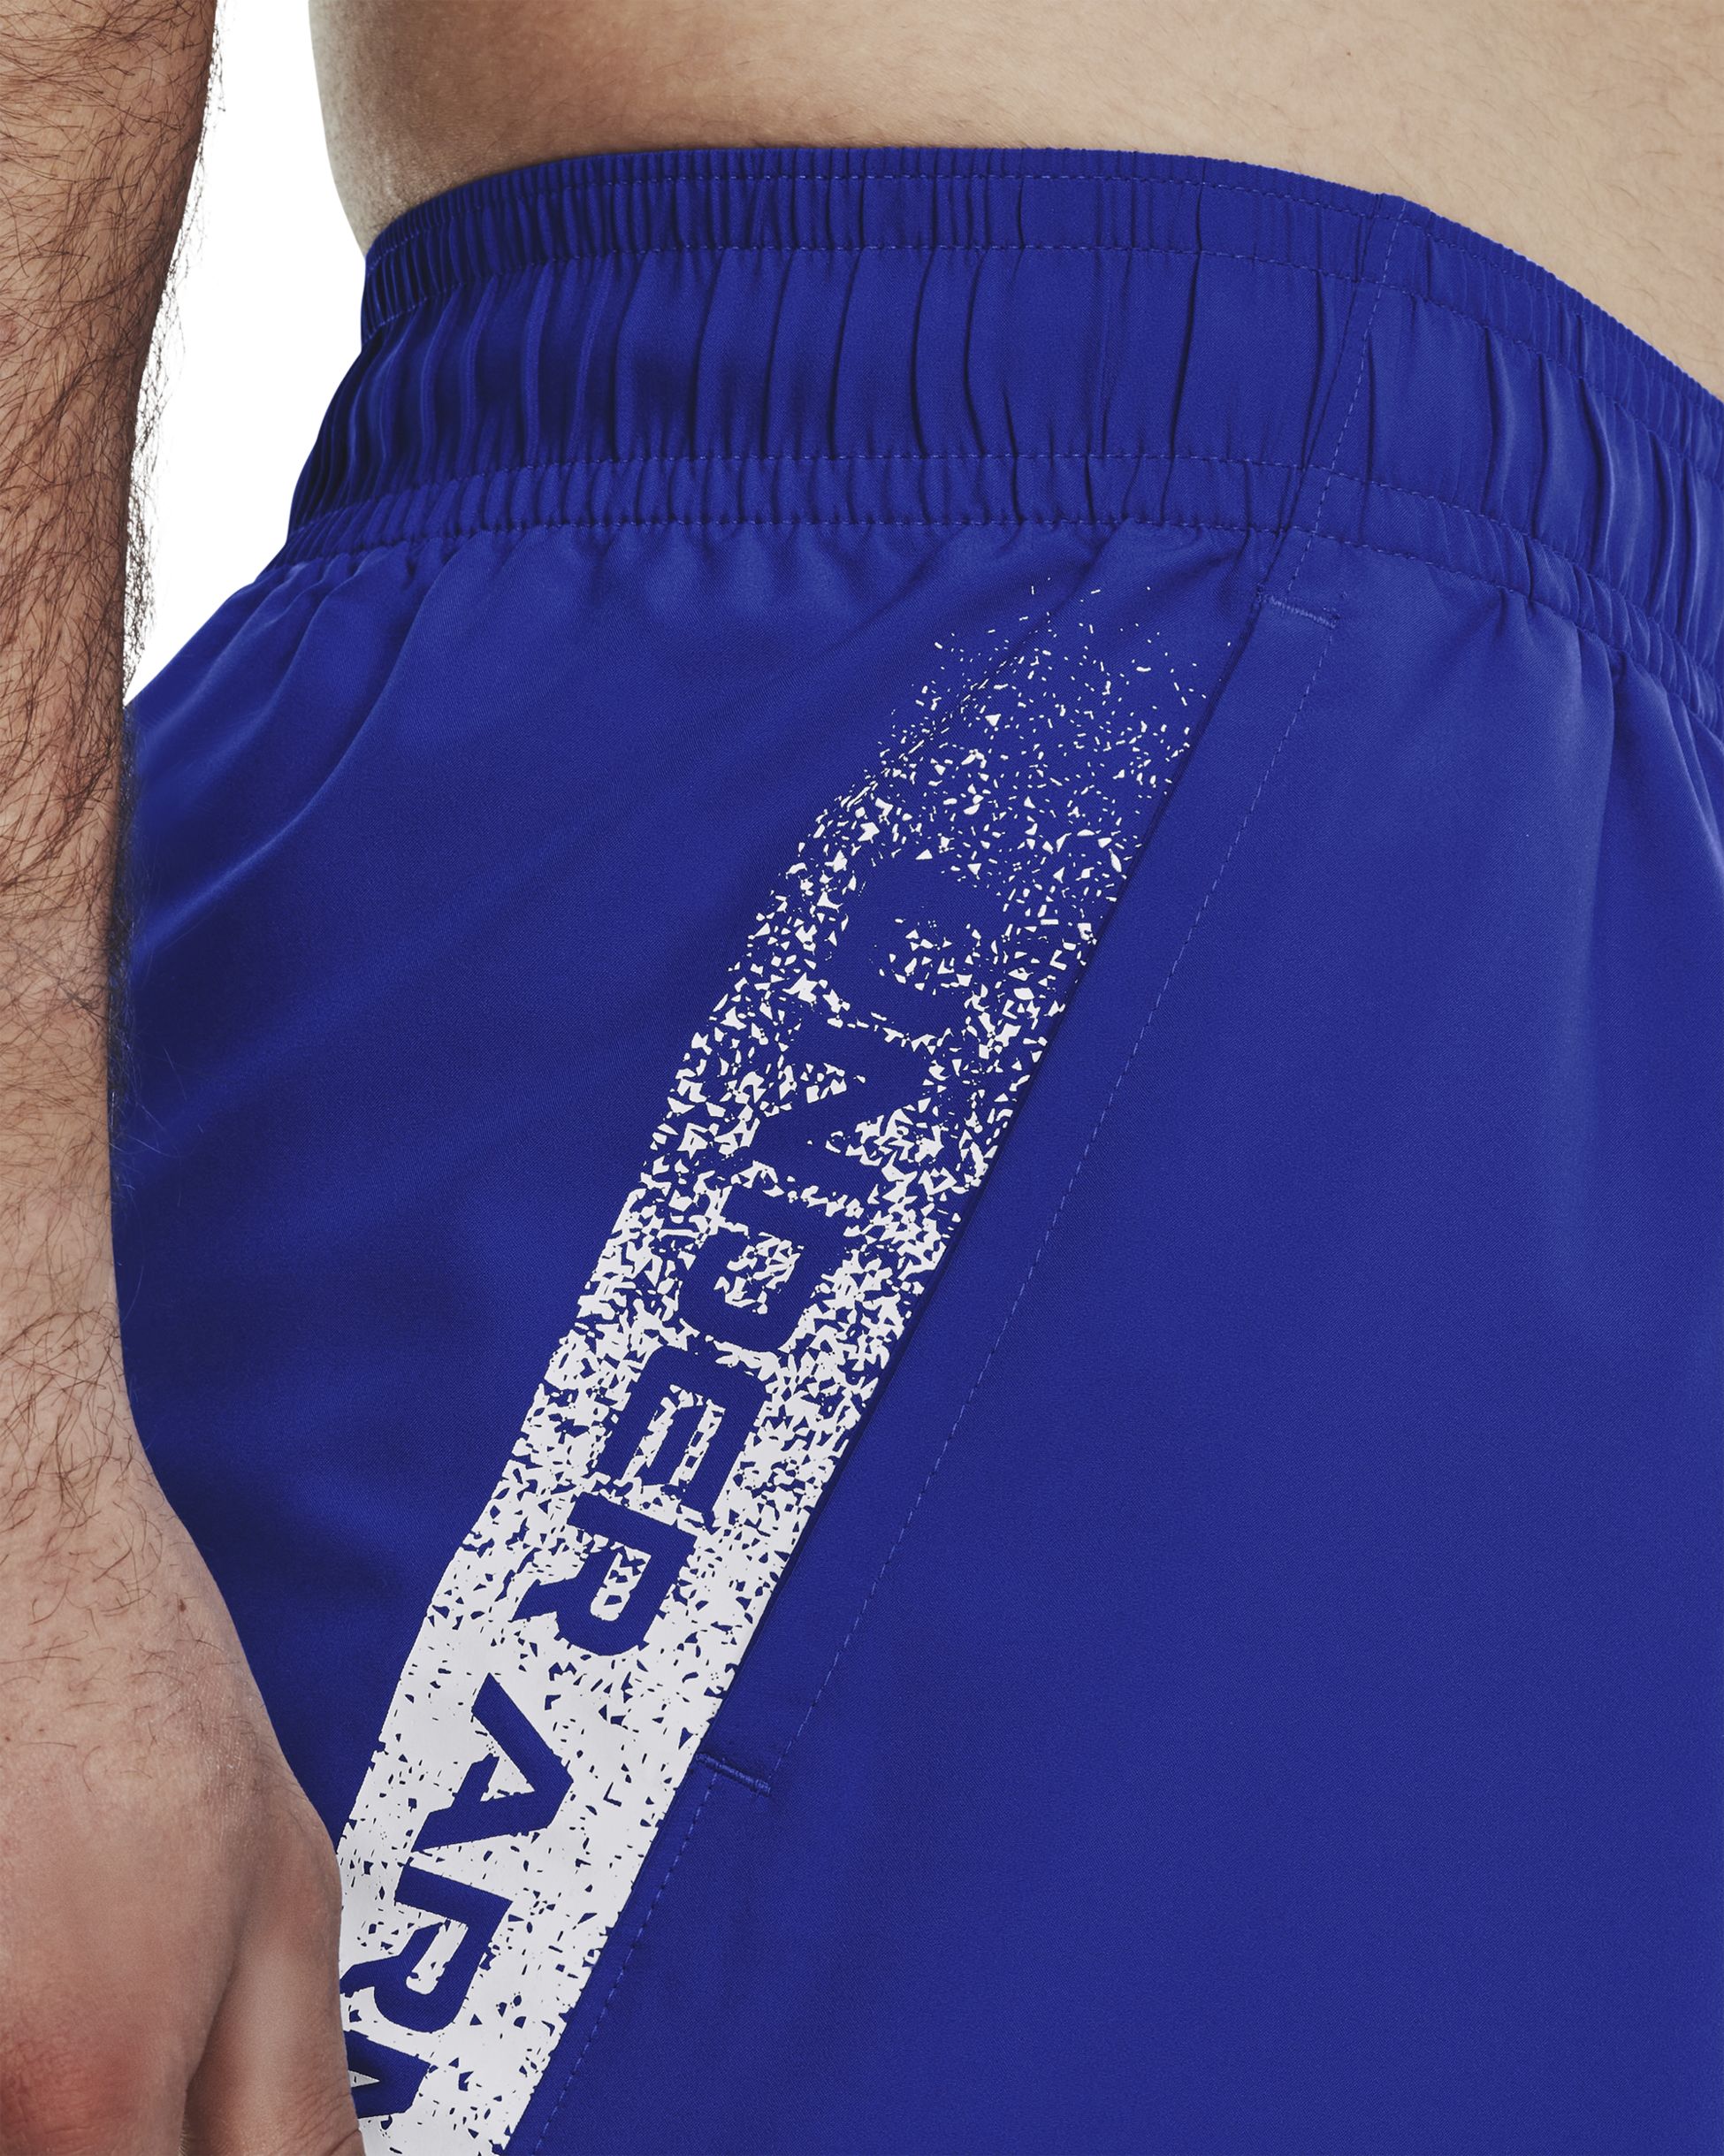 UNDER ARMOUR, M UA WOVEN GRAPHIC SHORTS